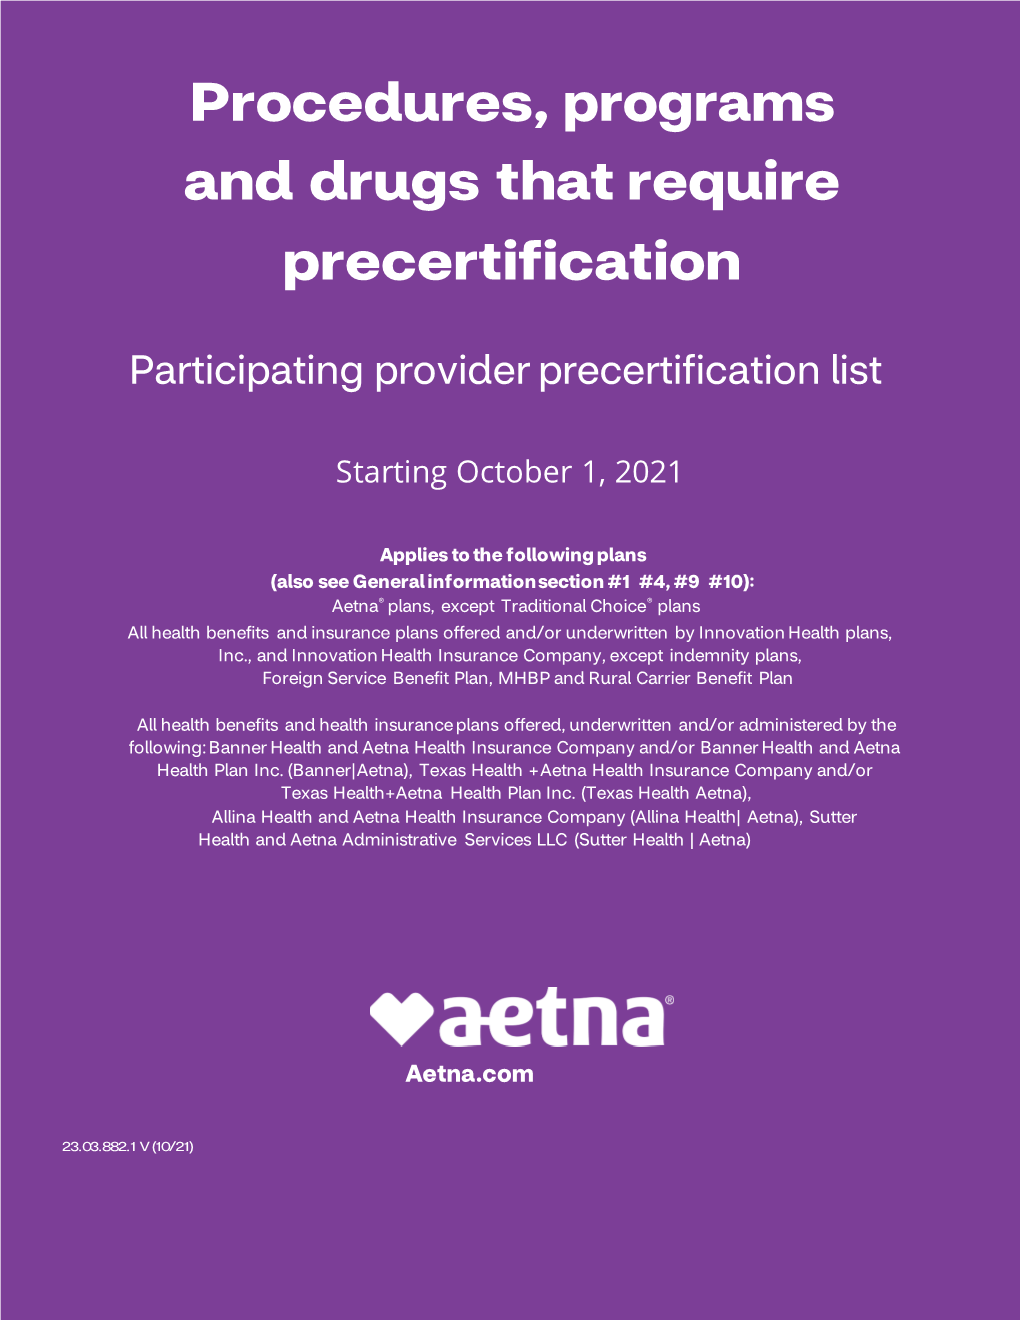 Procedures, Programs and Drugs That Require Precertification